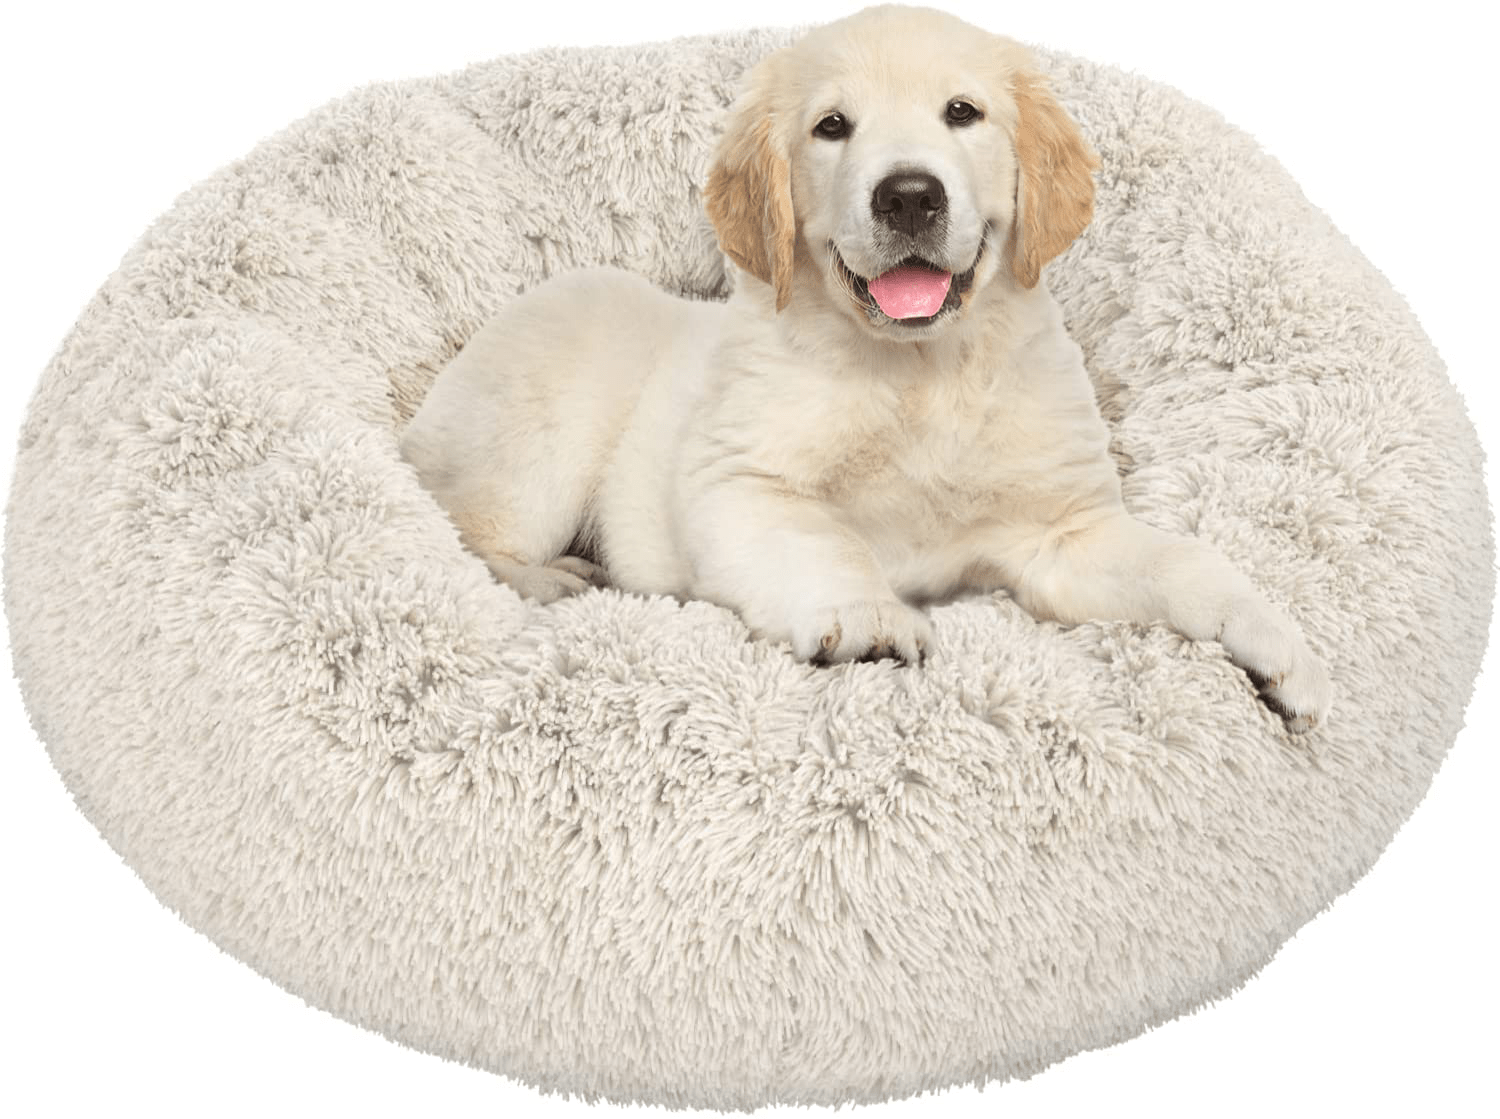 Active Pets Plush Calming Dog Bed, Donut Dog Bed for Small Dogs, Medium & Large, anti Anxiety Dog Bed, Soft Fuzzy Calming Bed for Dogs & Cats, Comfy Cat Bed, Marshmallow Cuddler Nest Calming Pet Bed